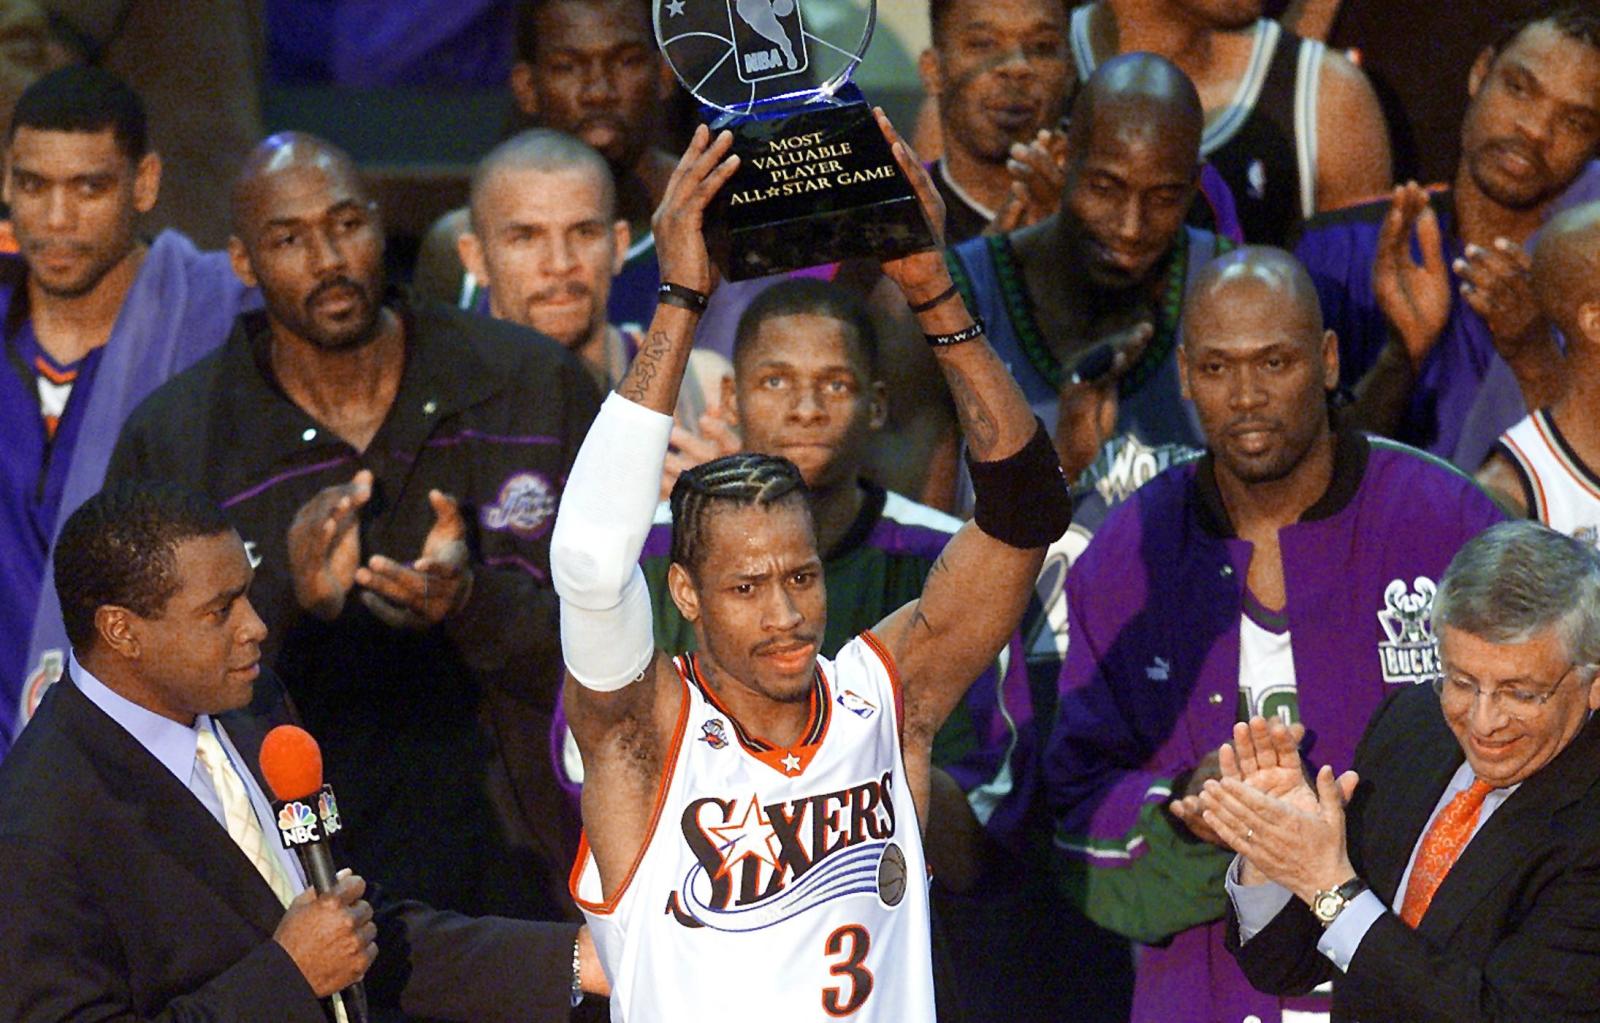 WASHINGTON, :  Philadelphia 76ers guard Allen Iverson (C) stands among his fellow NBA All-Stars and holds his MVP trophy for his performance in the 2001 NBA All-Star Game 11 February 2001 at the MCI Center in Washington, DC. Iverson scored 25 points and rallied the Eastern Conference from a 21-point fourth-quarter deficit to a dramatic 111-110 victory over the favored Western Conference in the 50th annual NBA All-Star Game. AFP PHOTO/Mario TAMA (Photo credit should read MARIO TAMA/AFP/Getty Images)